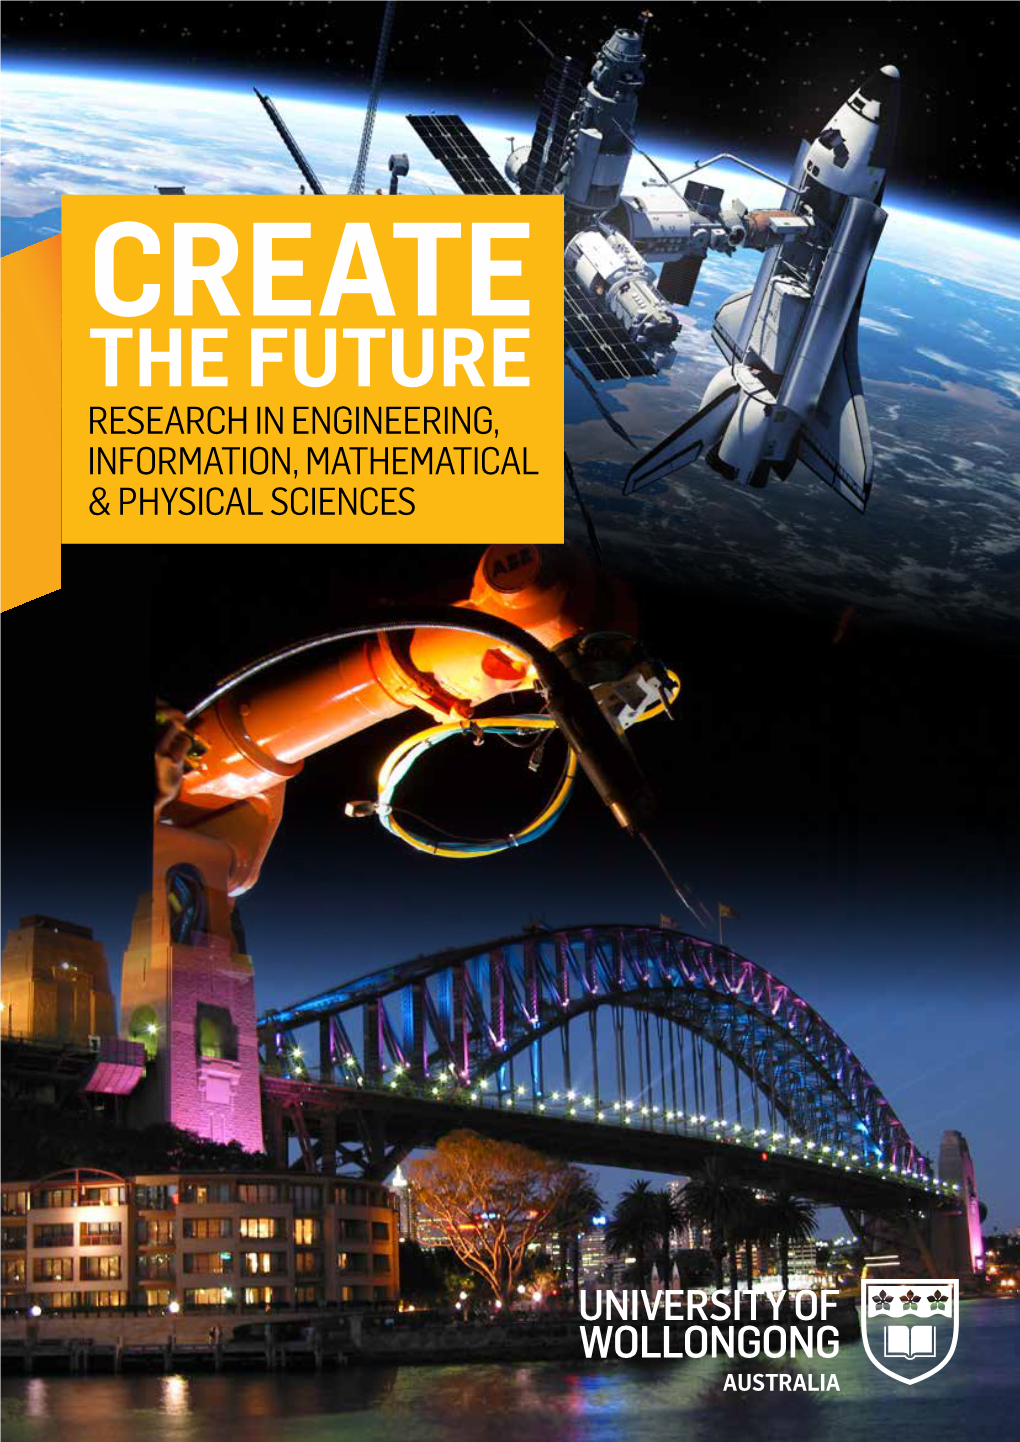 The Future Research in Engineering, Information, Mathematical & Physical Sciences